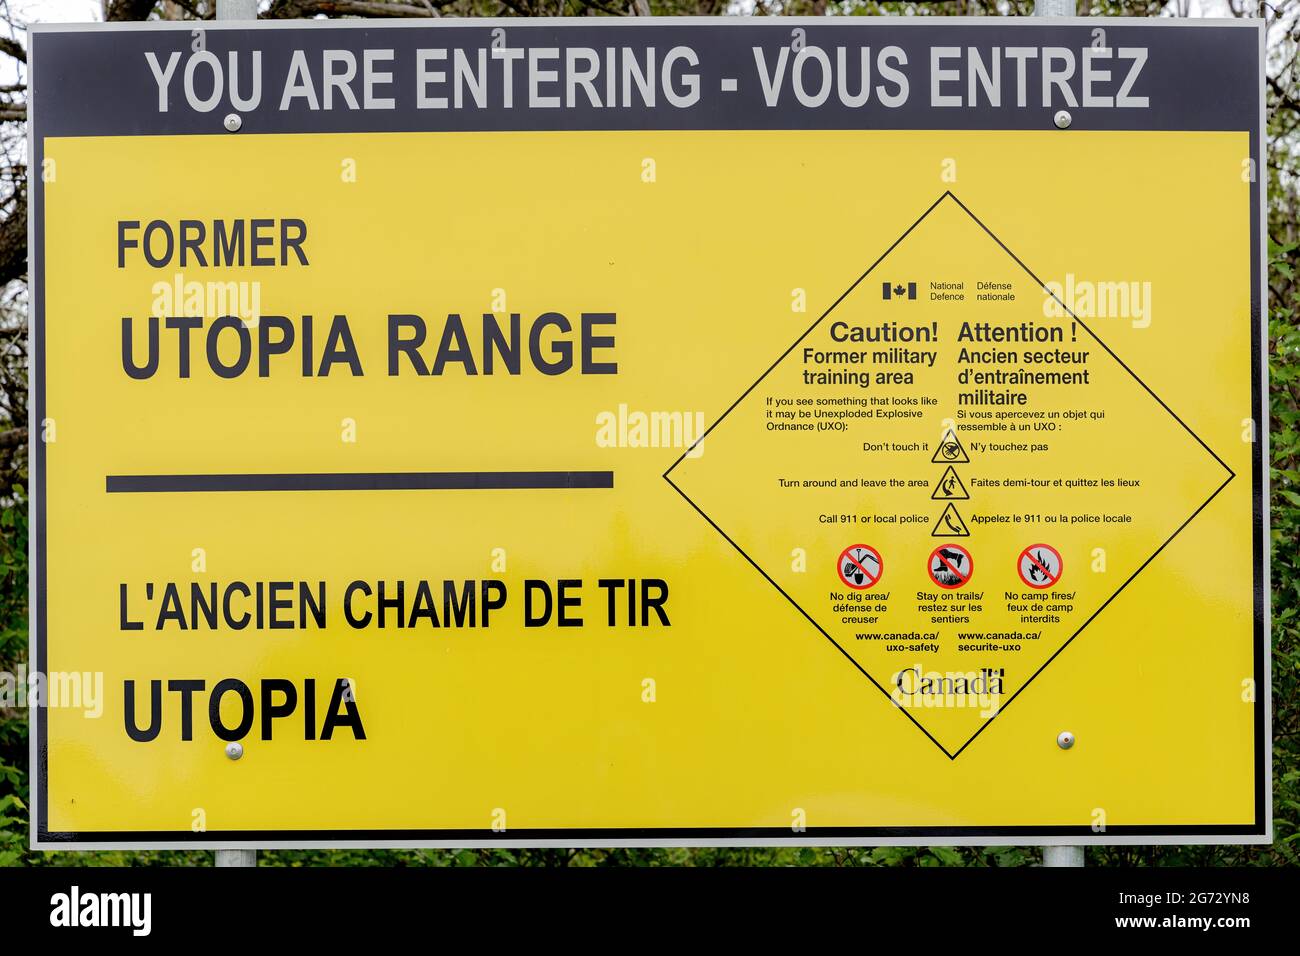 Utopia, NB, Canada - July 3, 2021: Warning for the Utopia Range, a military training area in WW2. It explains what to do if ordinance is found. Stock Photo